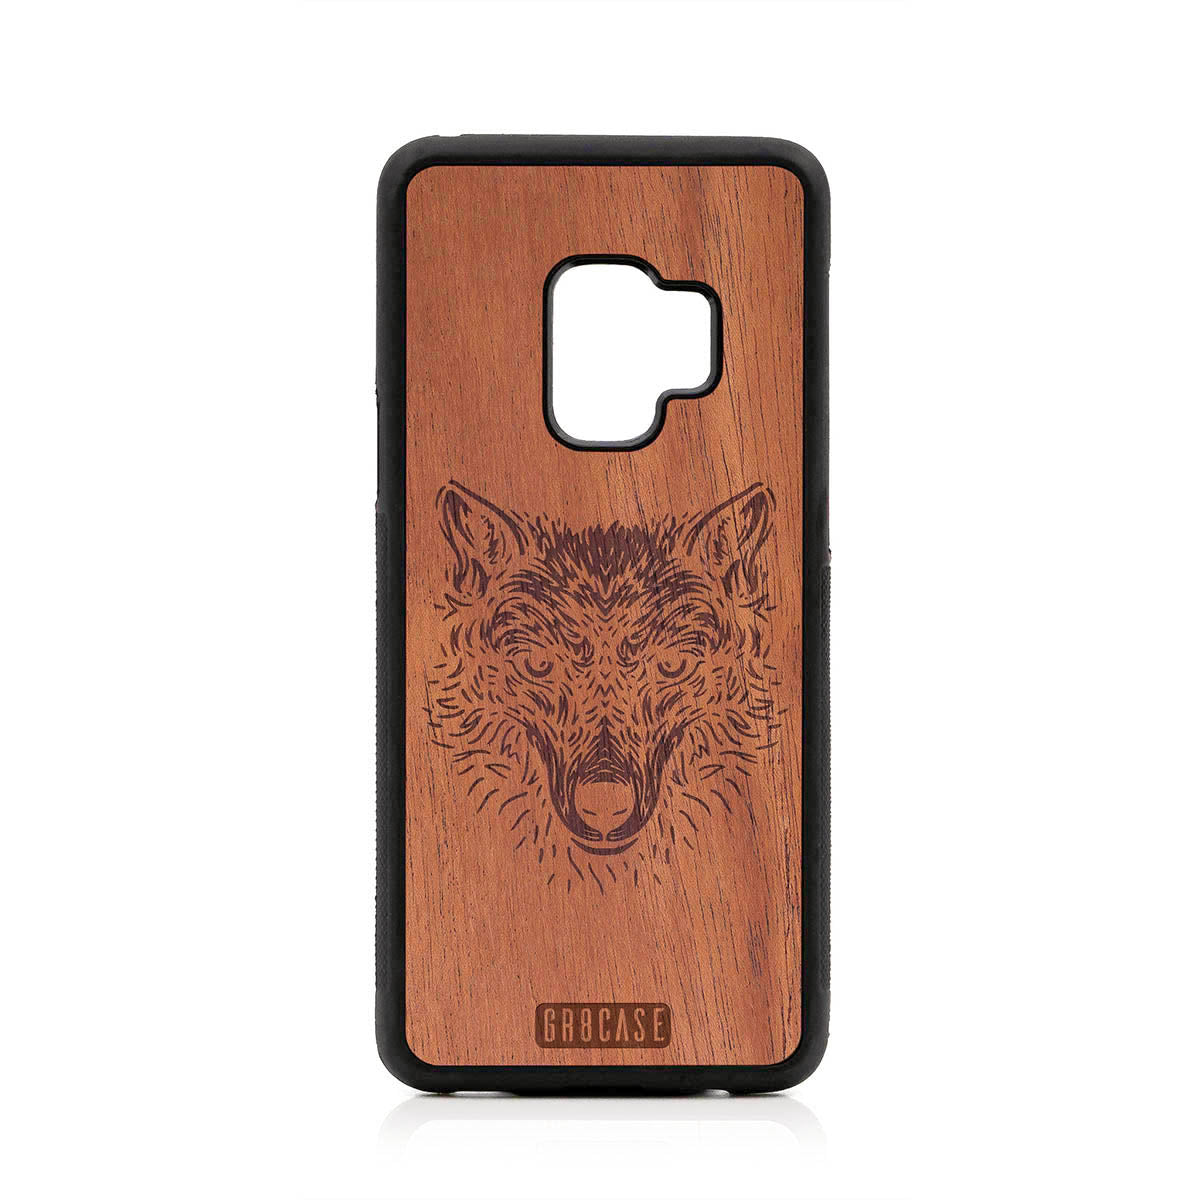 Furry Wolf Design Wood Case For Samsung Galaxy S9